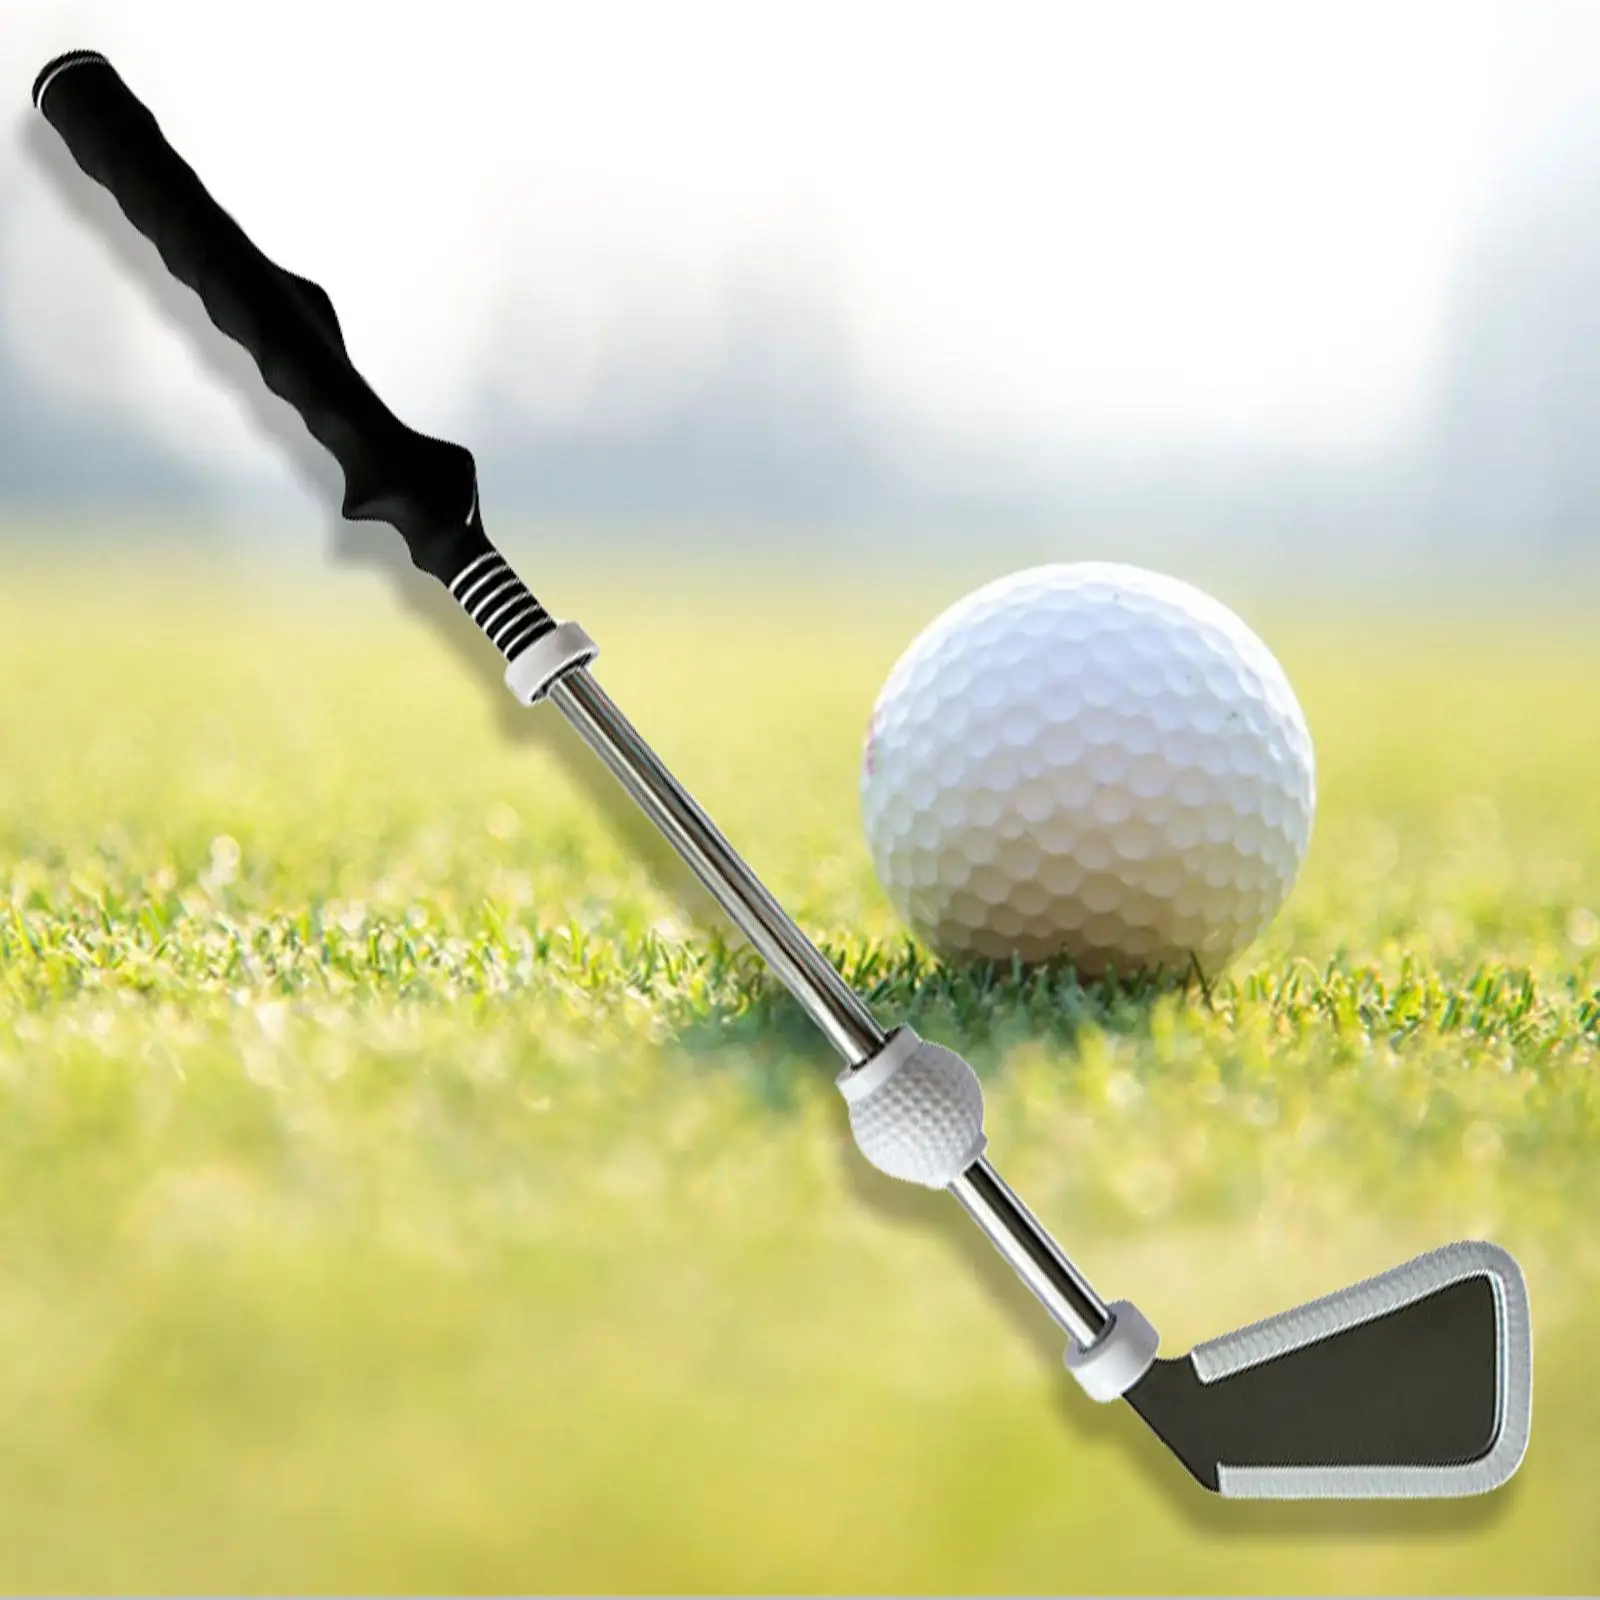 Golf Swing Trainer Aid Warm up Effectively Help to Correct Posture and Strength Golf Swing Training Tool Golf Grip Training